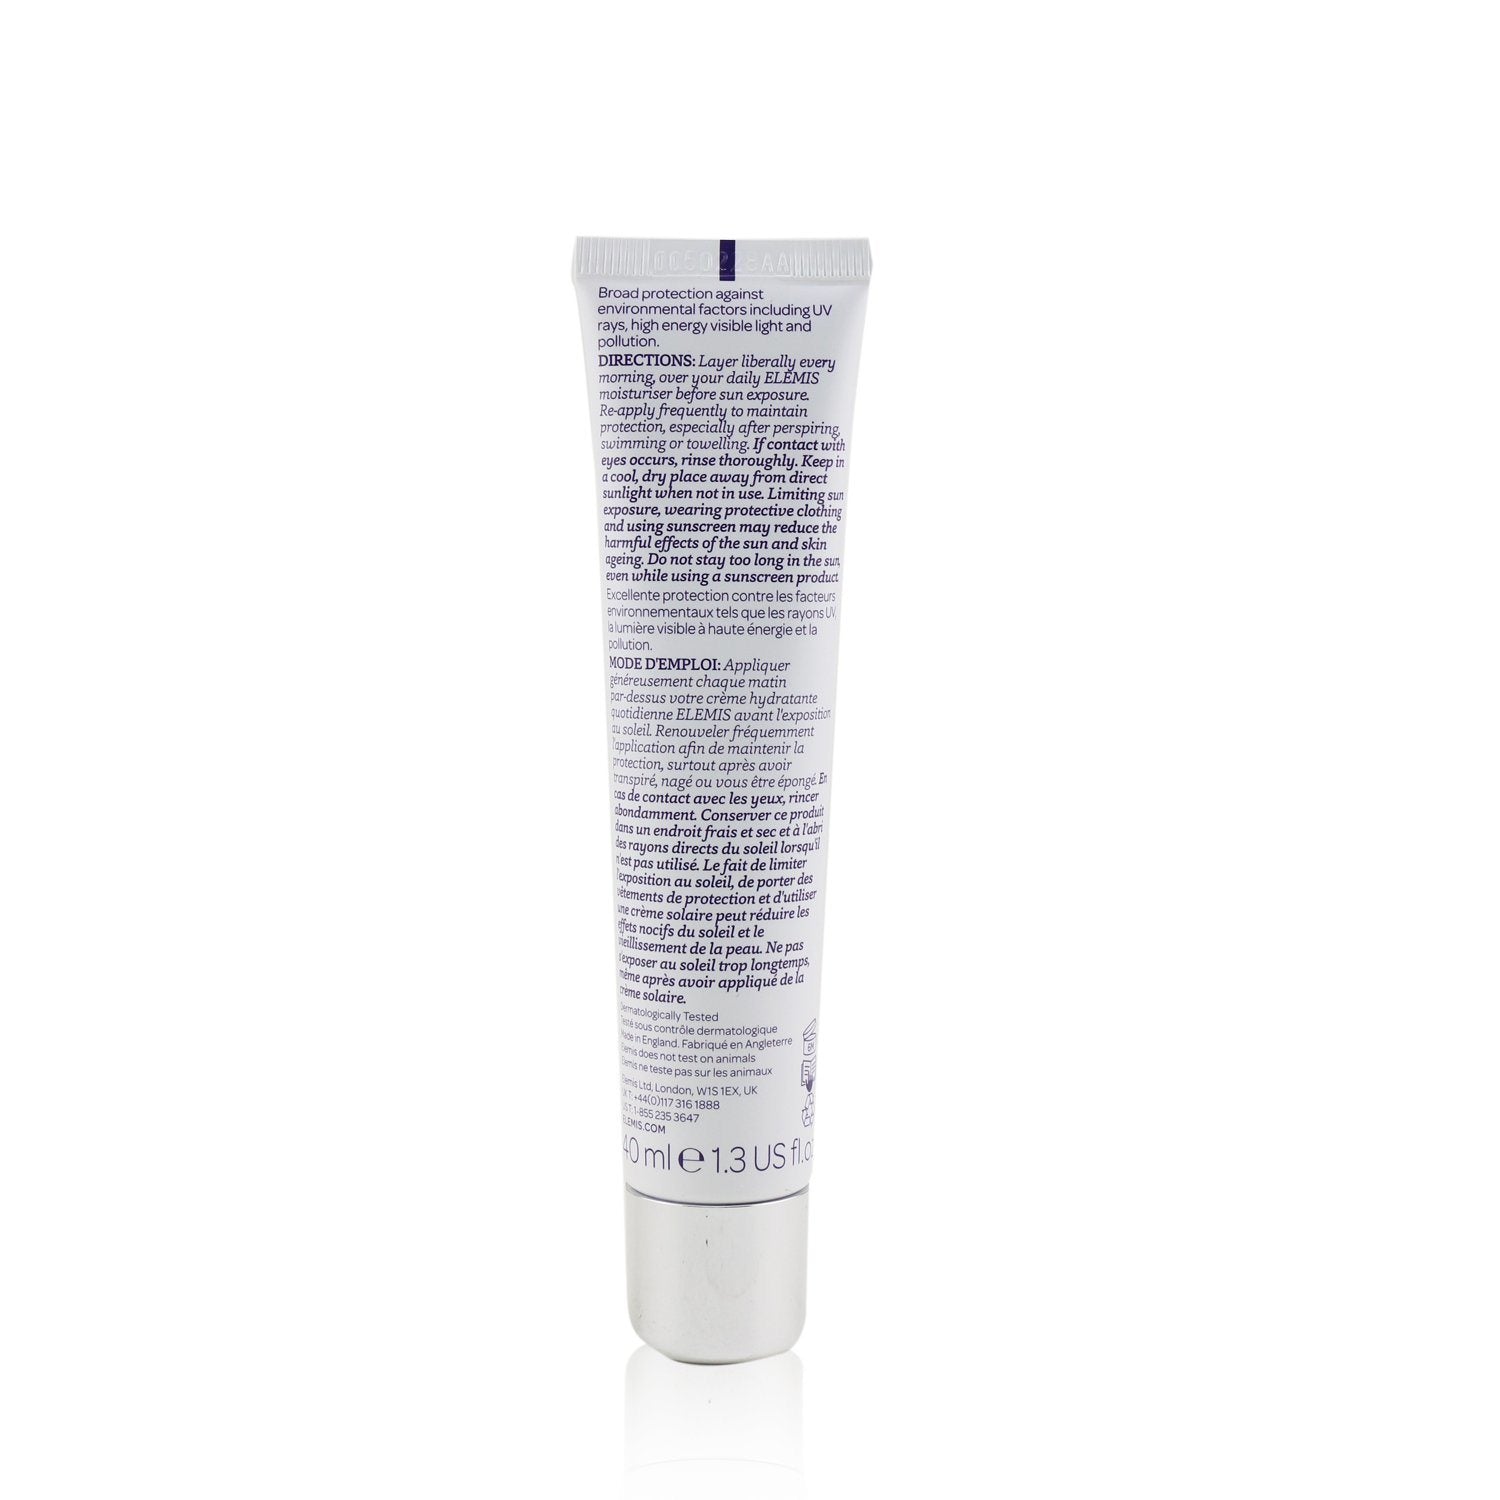 White tube of Daily Defence Shield SPF 30 sunscreen with pollution protection against a pure white background.